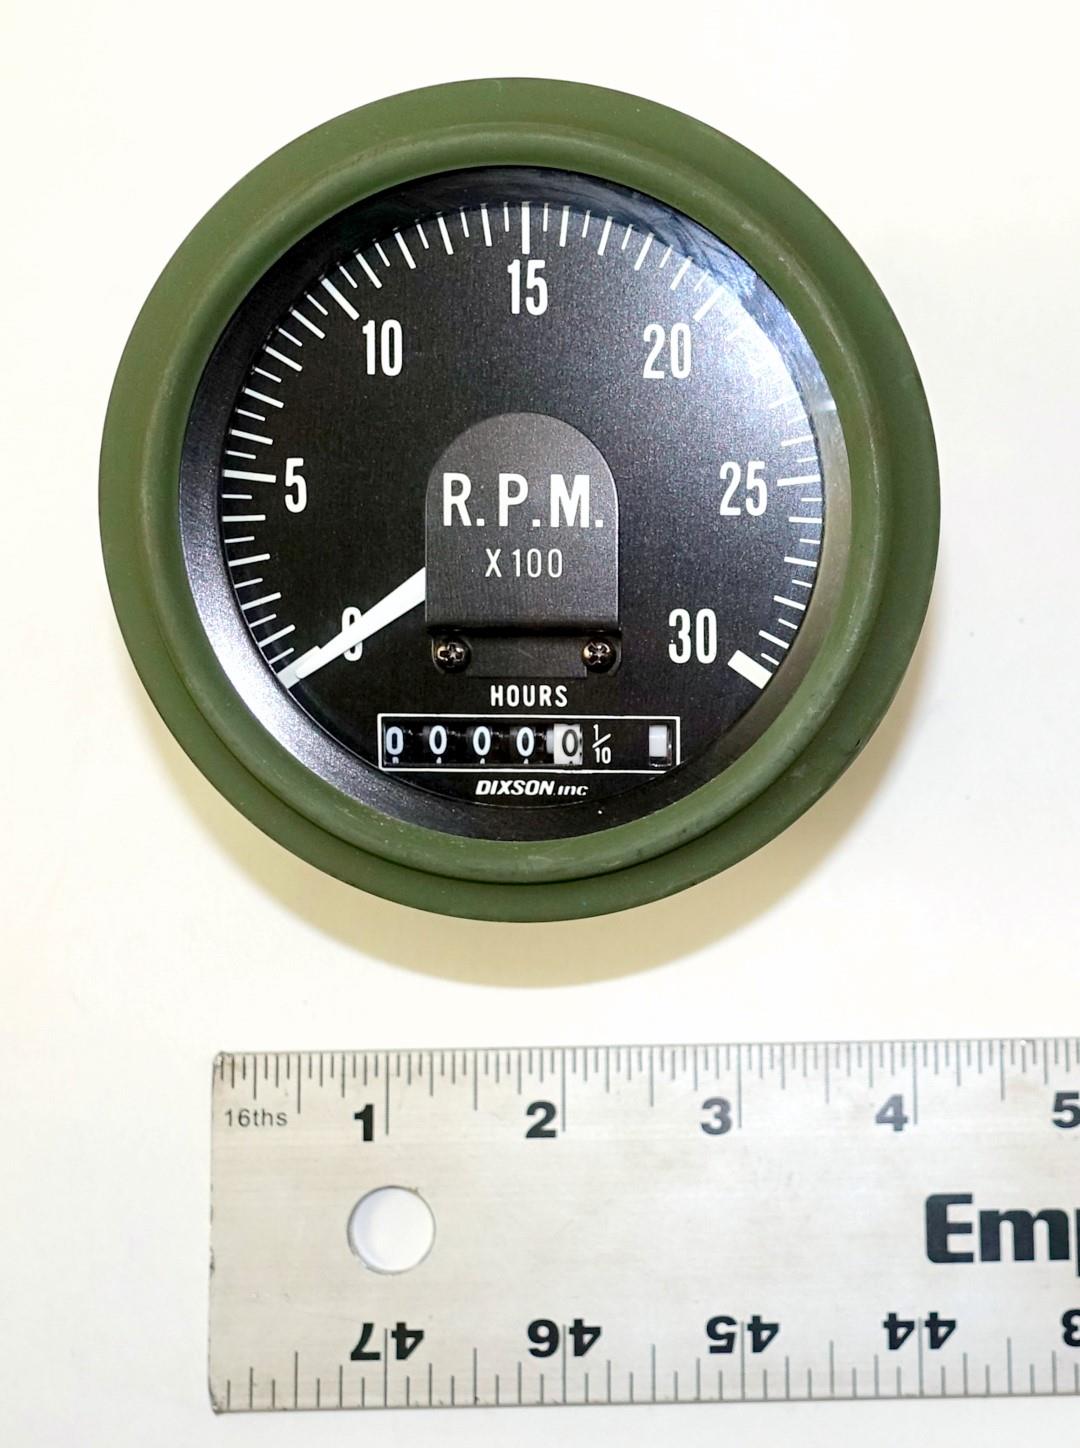 MA3-698 | 6680-01-415-4025 Electronic Tachometer with Hour Meter for M35A3 Series NOS (2).JPG